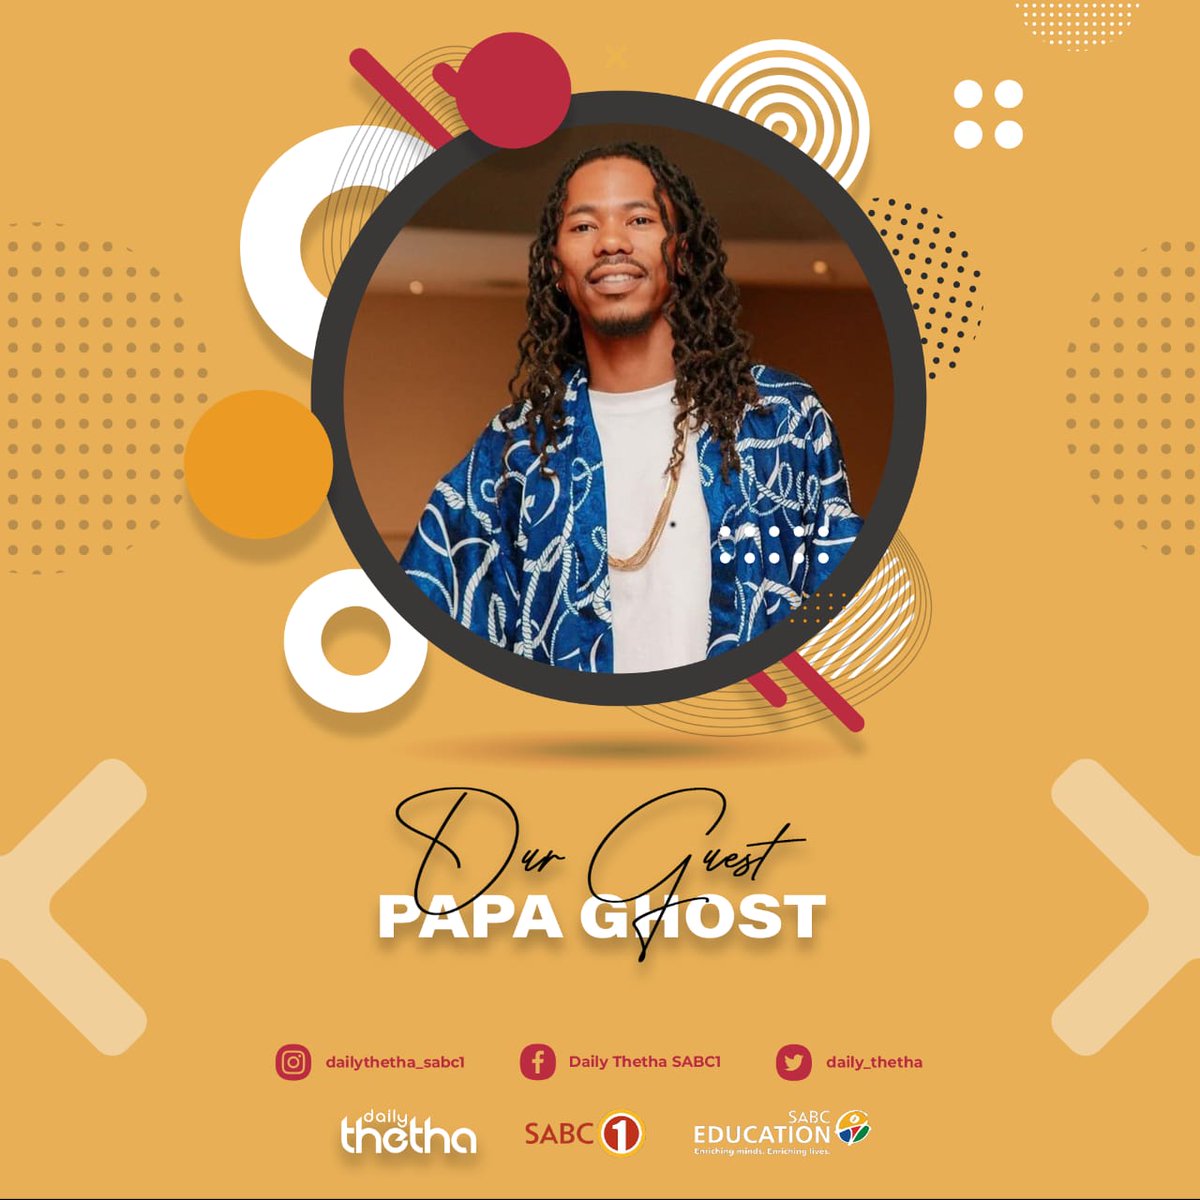 Our fave is on TV tomorrow morning...📺🔥 Be sure to tune into @daily_thetha at 10:30AM, as he'll be giving some insights on an interesting industry topic. 🤌🏽 Don't miss it! @Official_SABC1 @SABCEducation #TeamPapaGhost #PapaGhost #BBMzansi